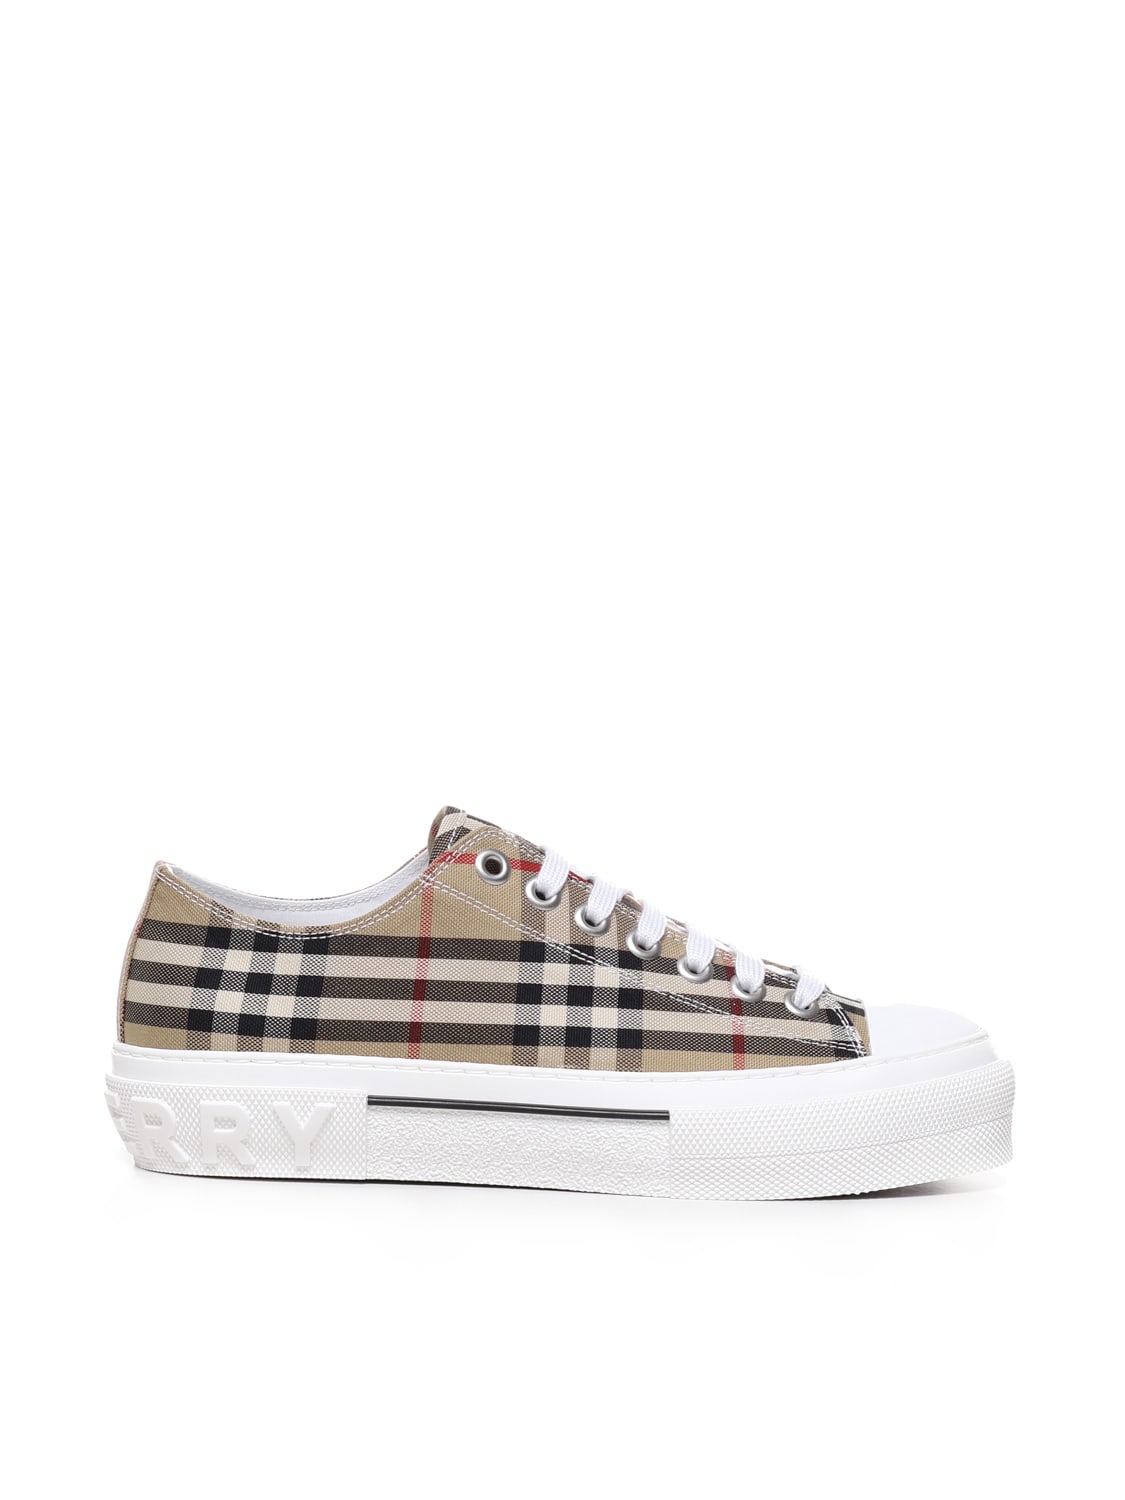 Burberry Cotton Sneaker With Vintage Check Pattern In Multi